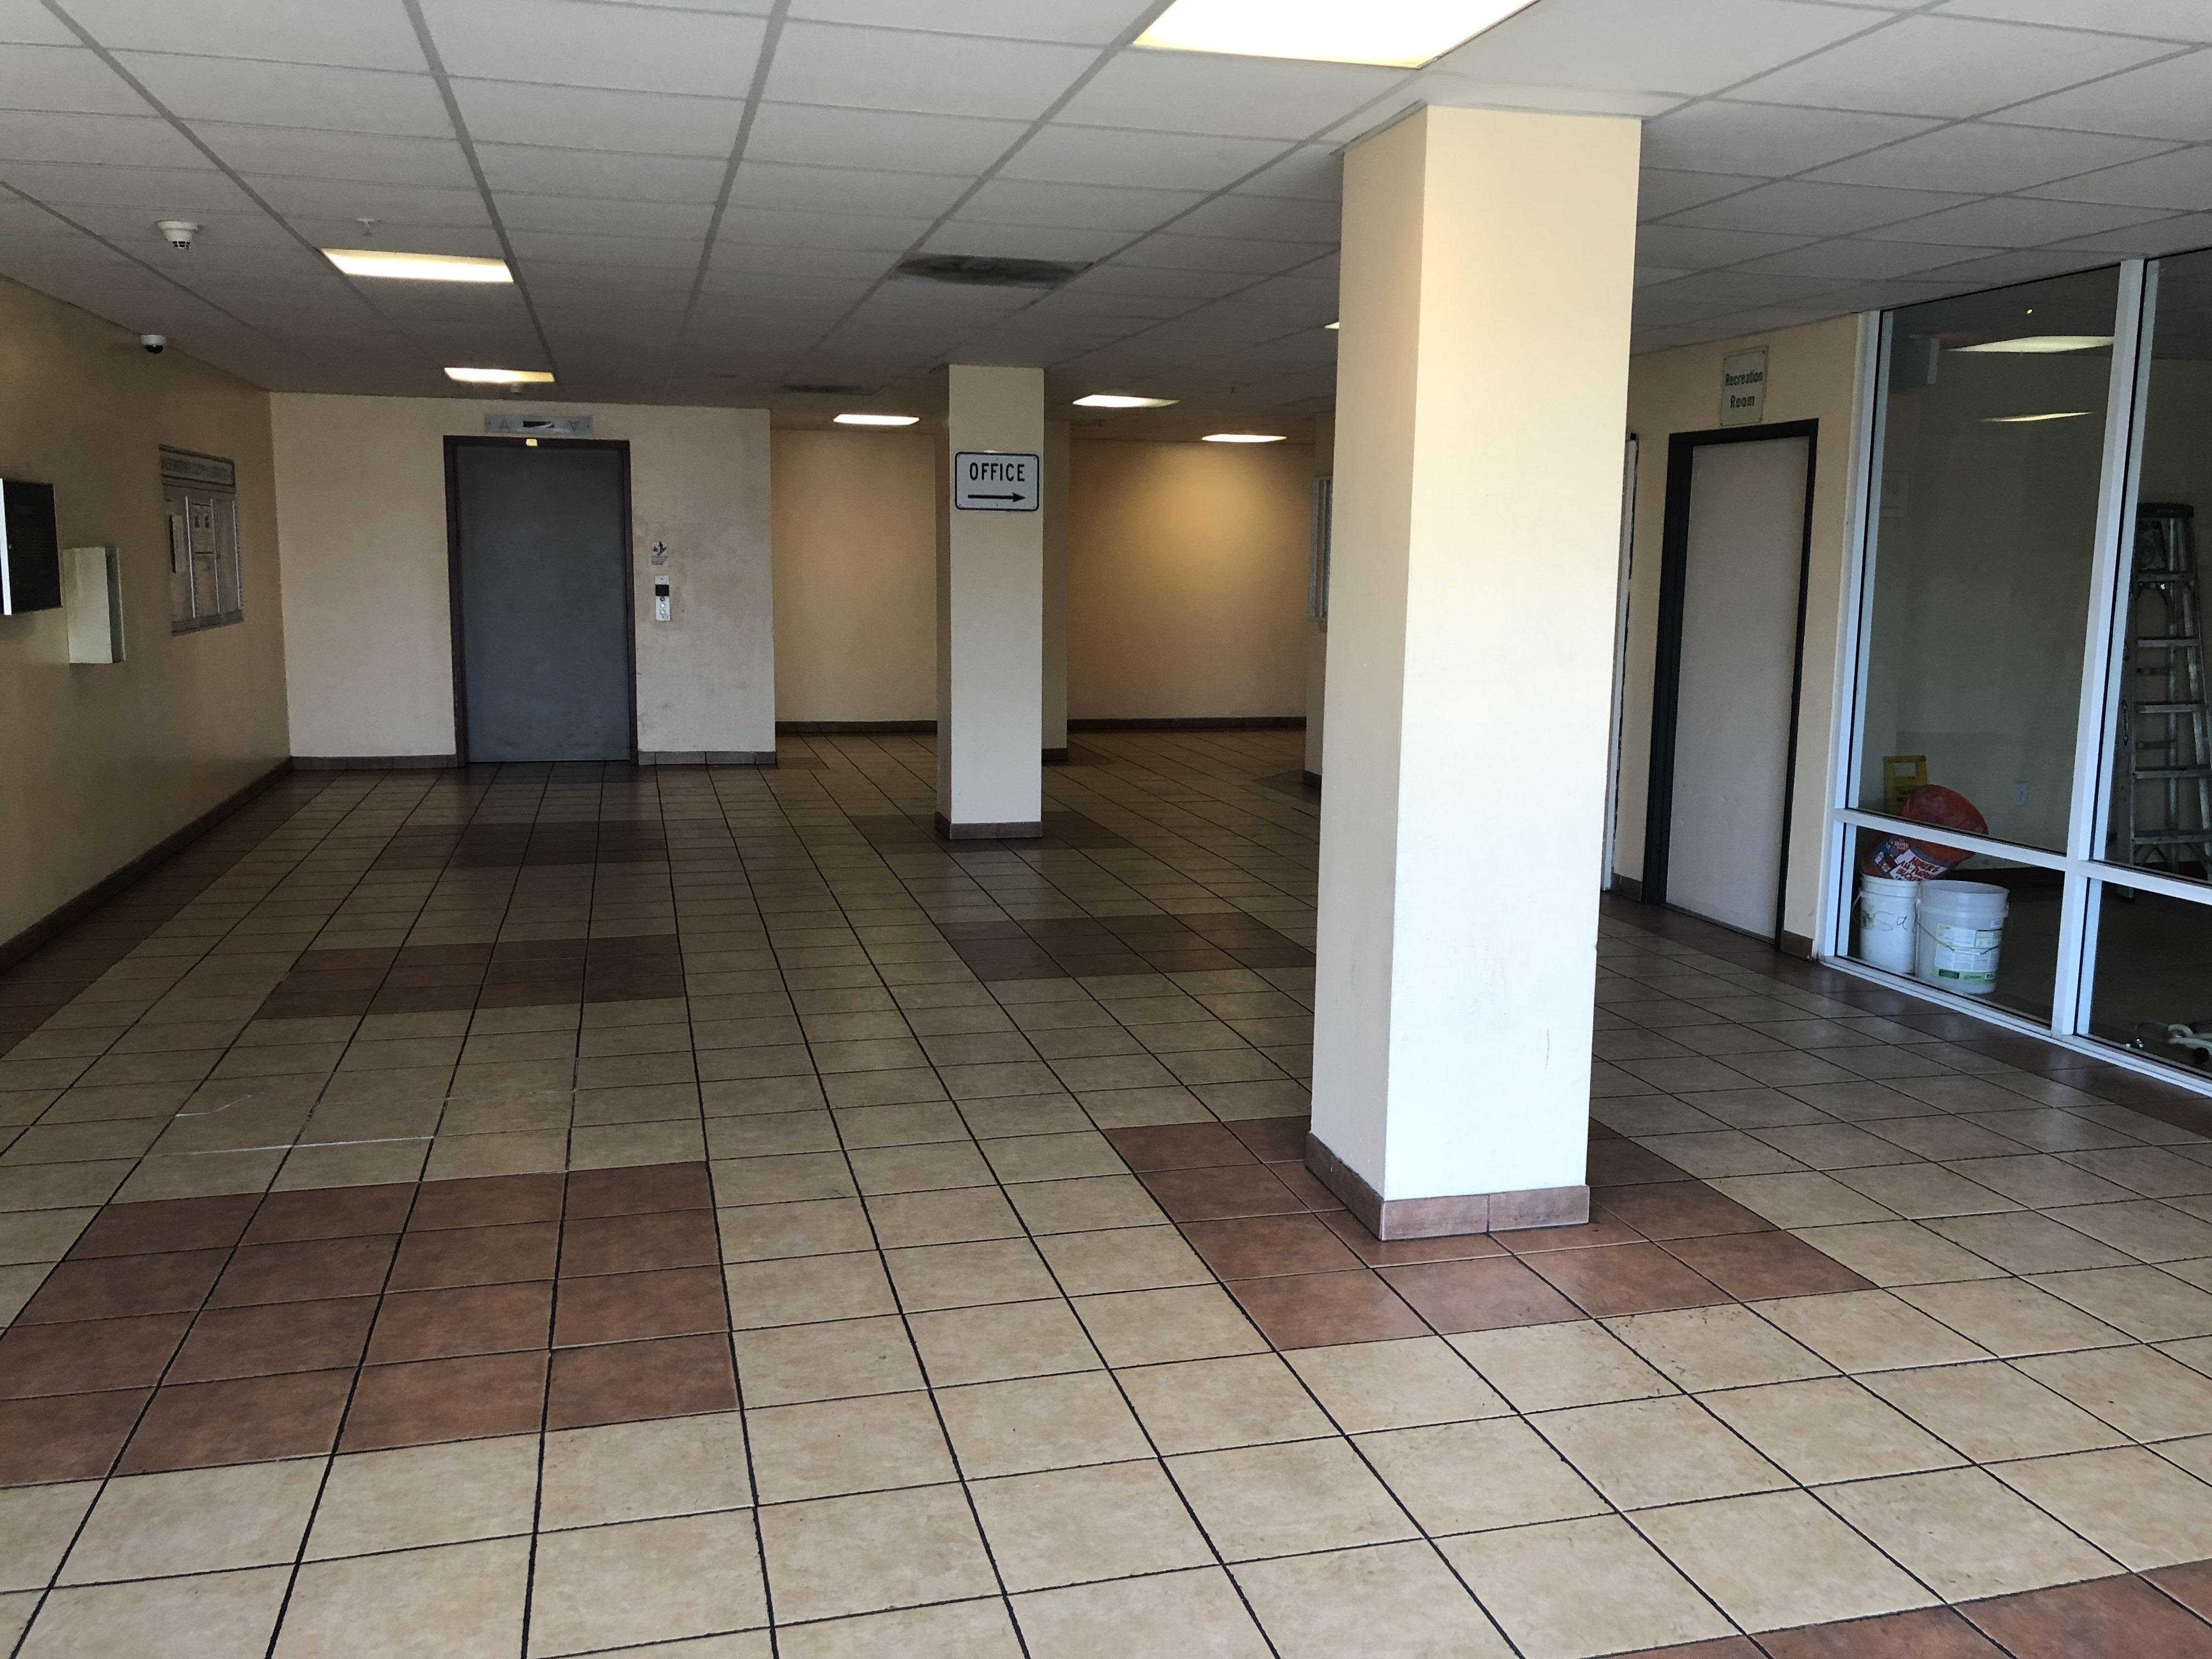 vermont city lights lobby area. large tiled area with bulletin board on wall. access to office area